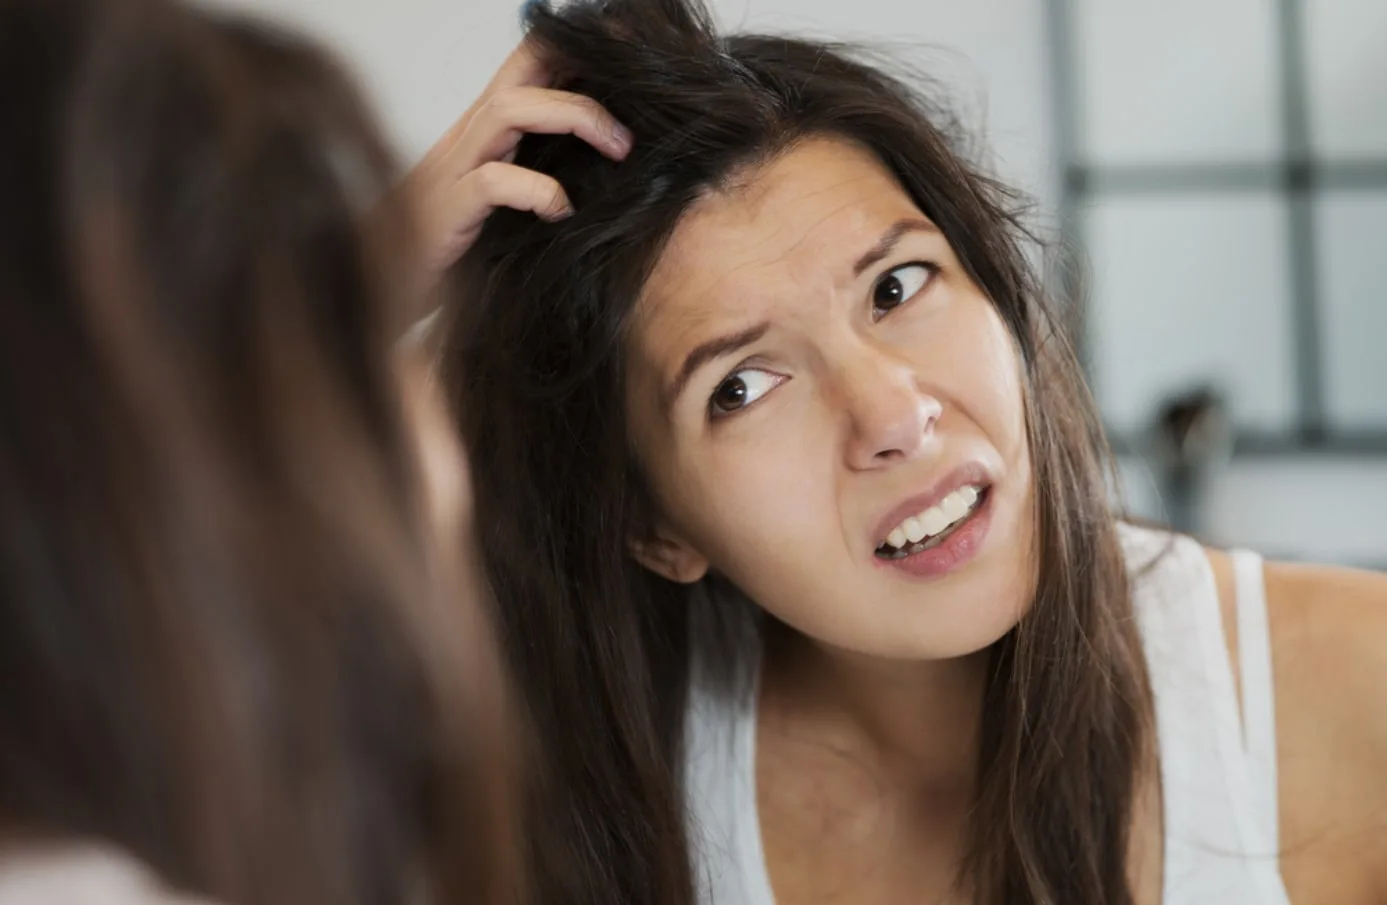 HOW TO EXFOLIATE YOUR SCALP TO PREVENT DANDRUFF